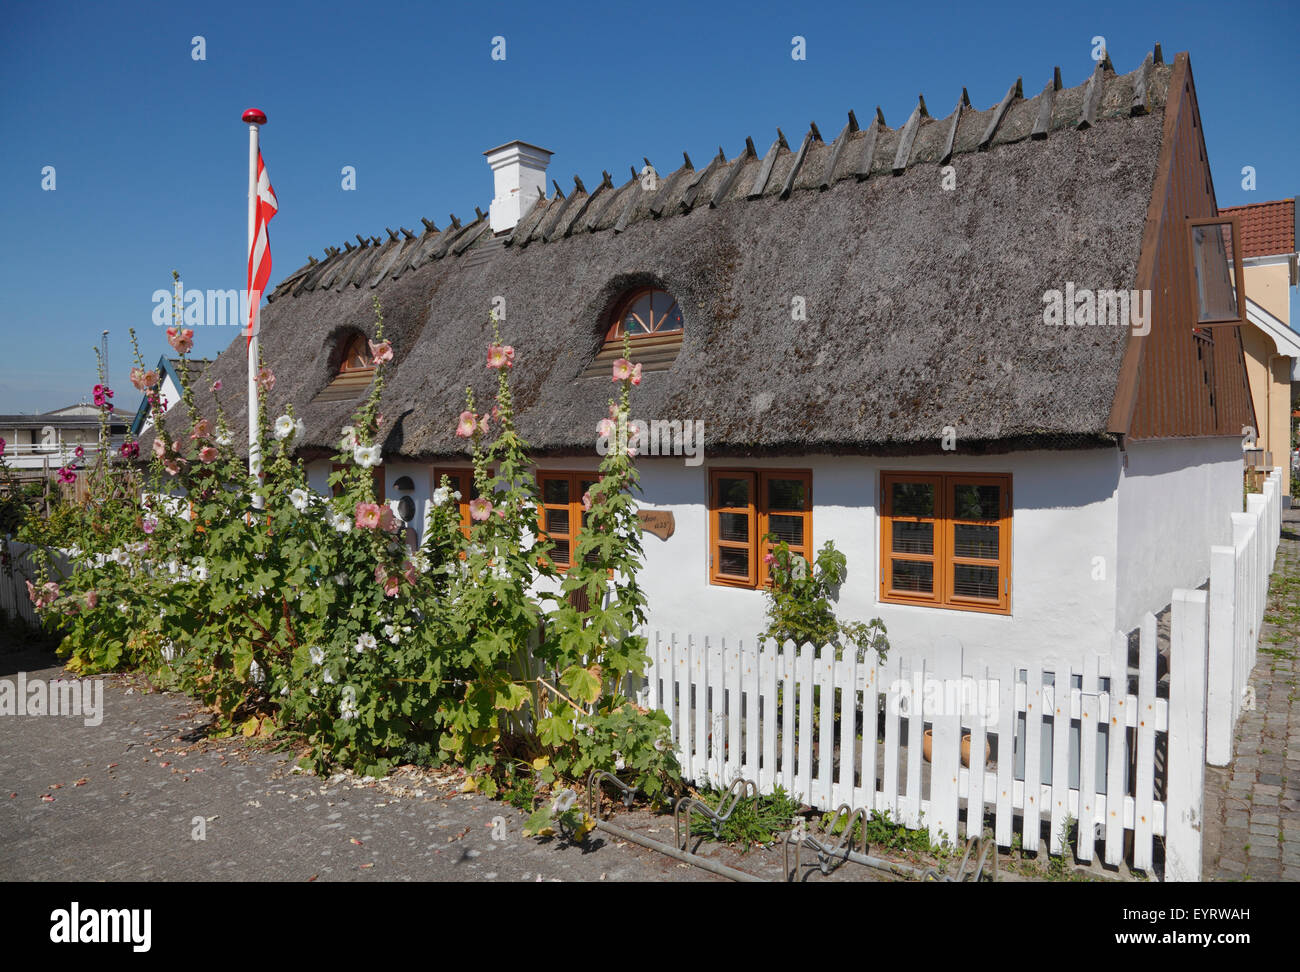 Charming old house with a thatched roof and hollyhocks in the garden on Nørregade the main street of the small town Hundested, Sealand, Denmark Stock Photo